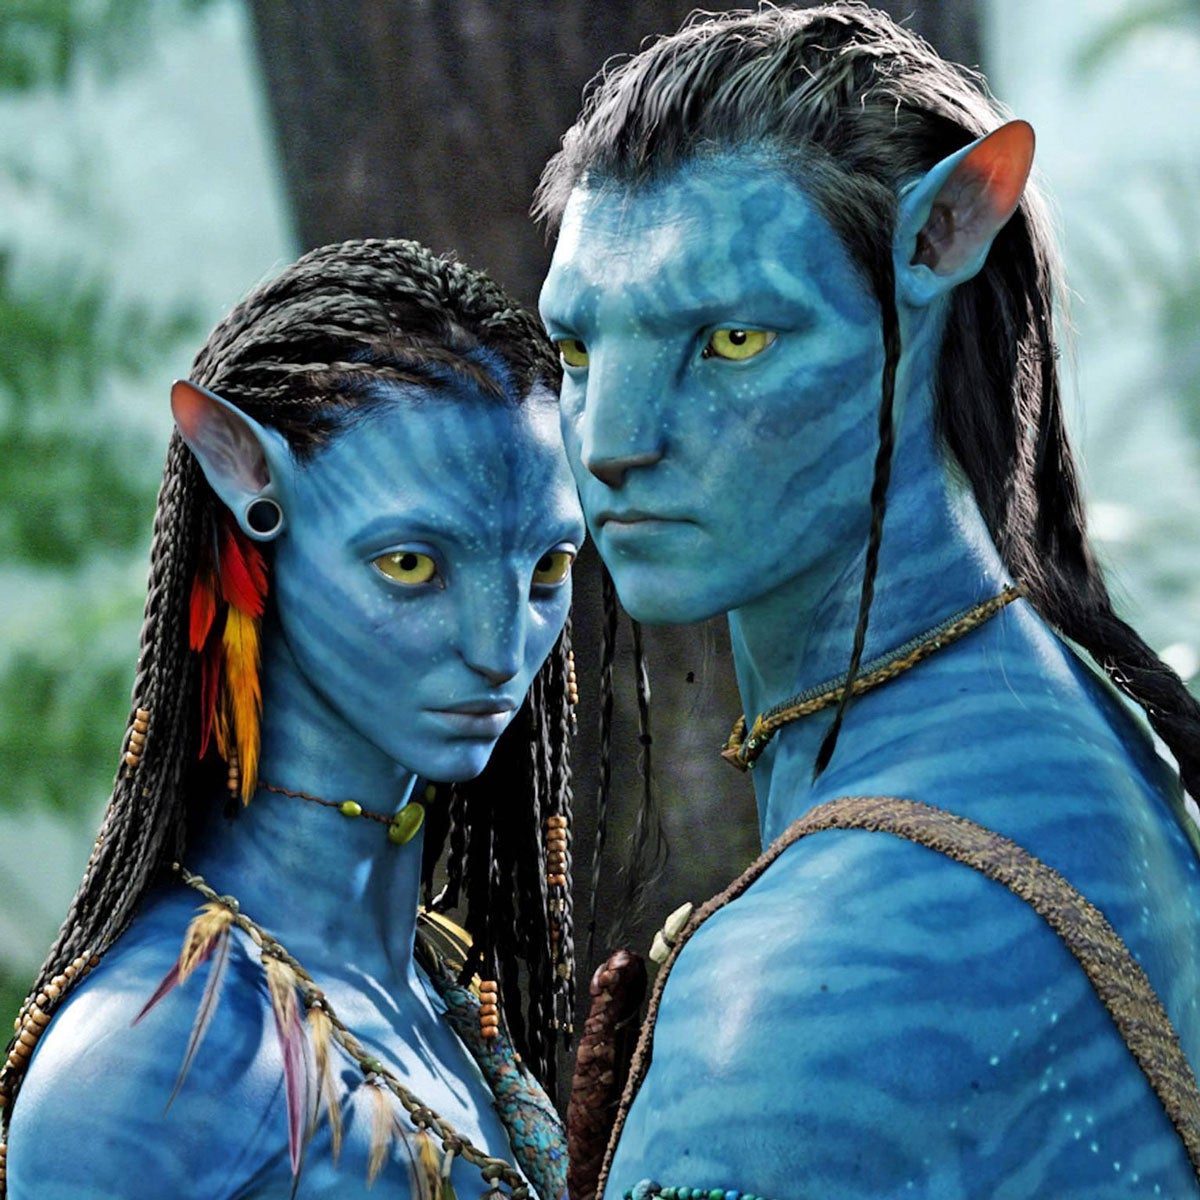 Main characters from the film Avatar 